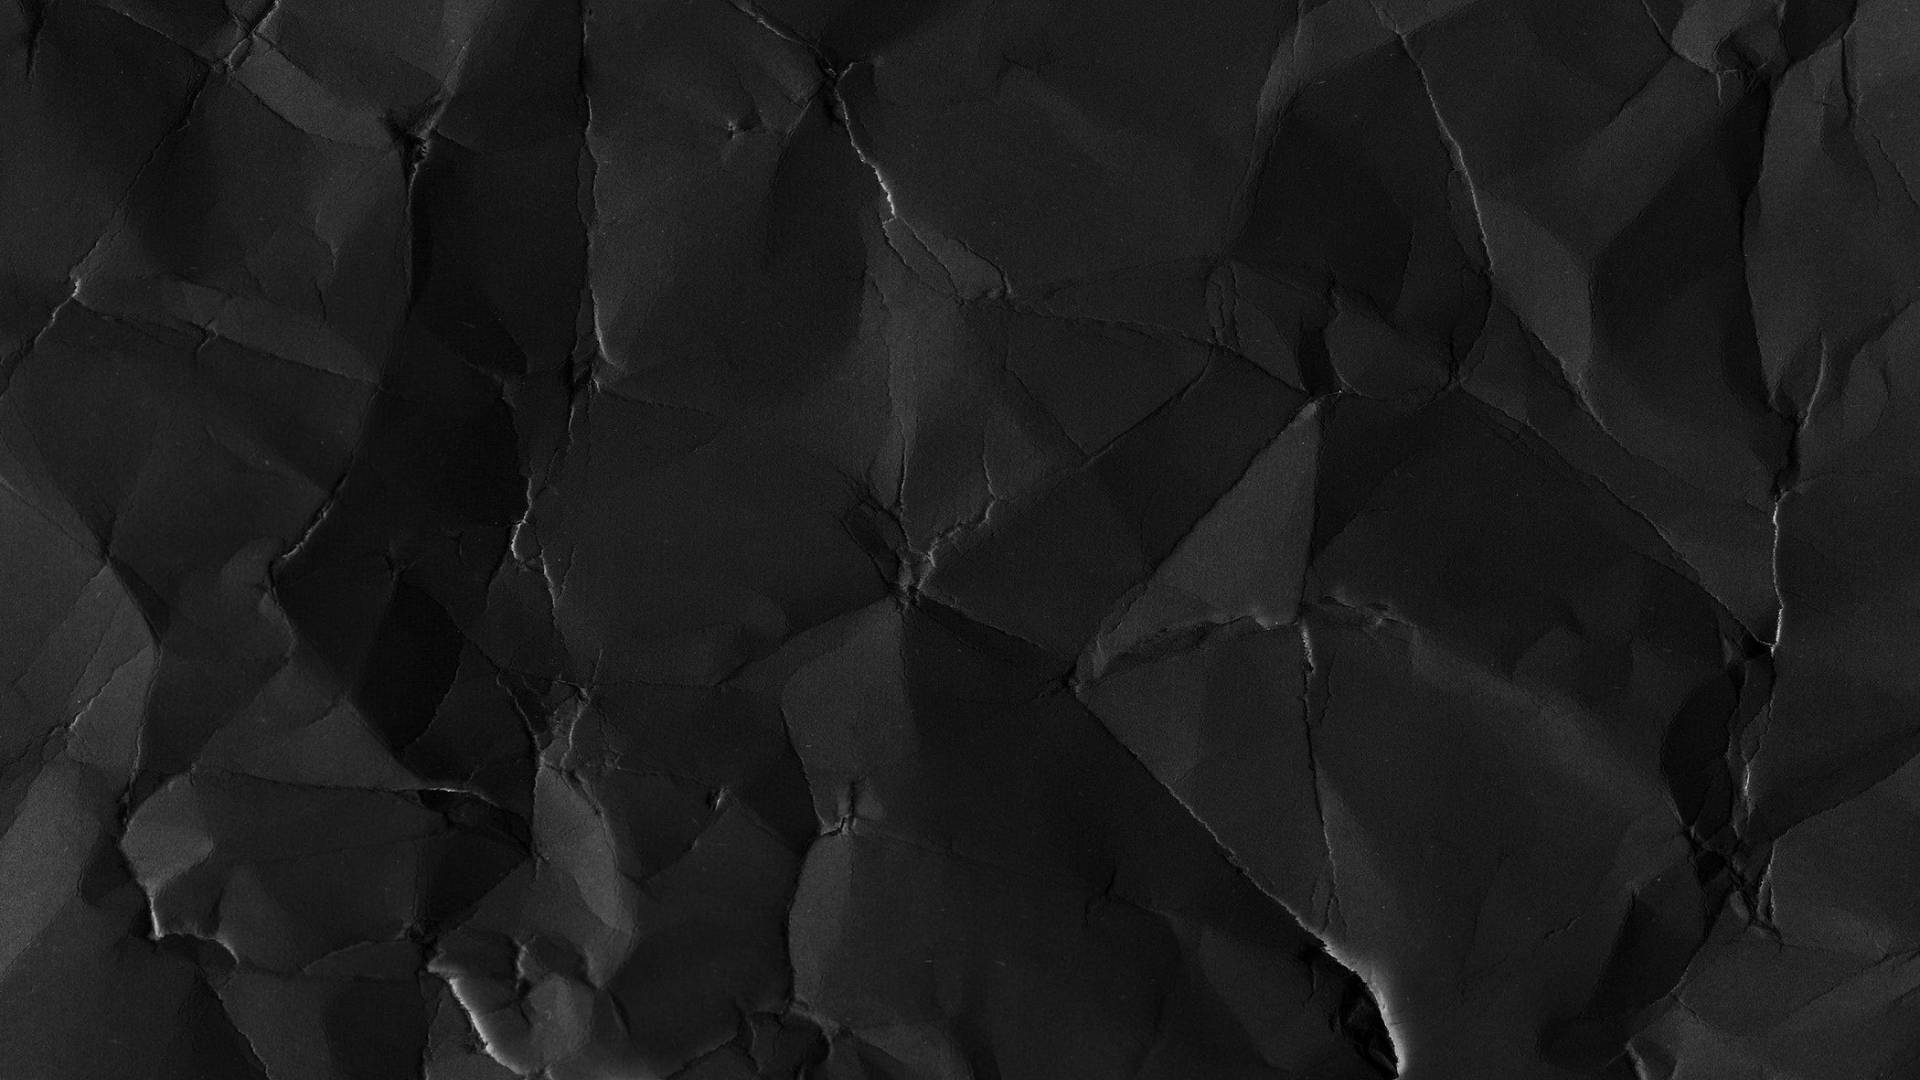 Blank Black With Crumpled Design Wallpaper